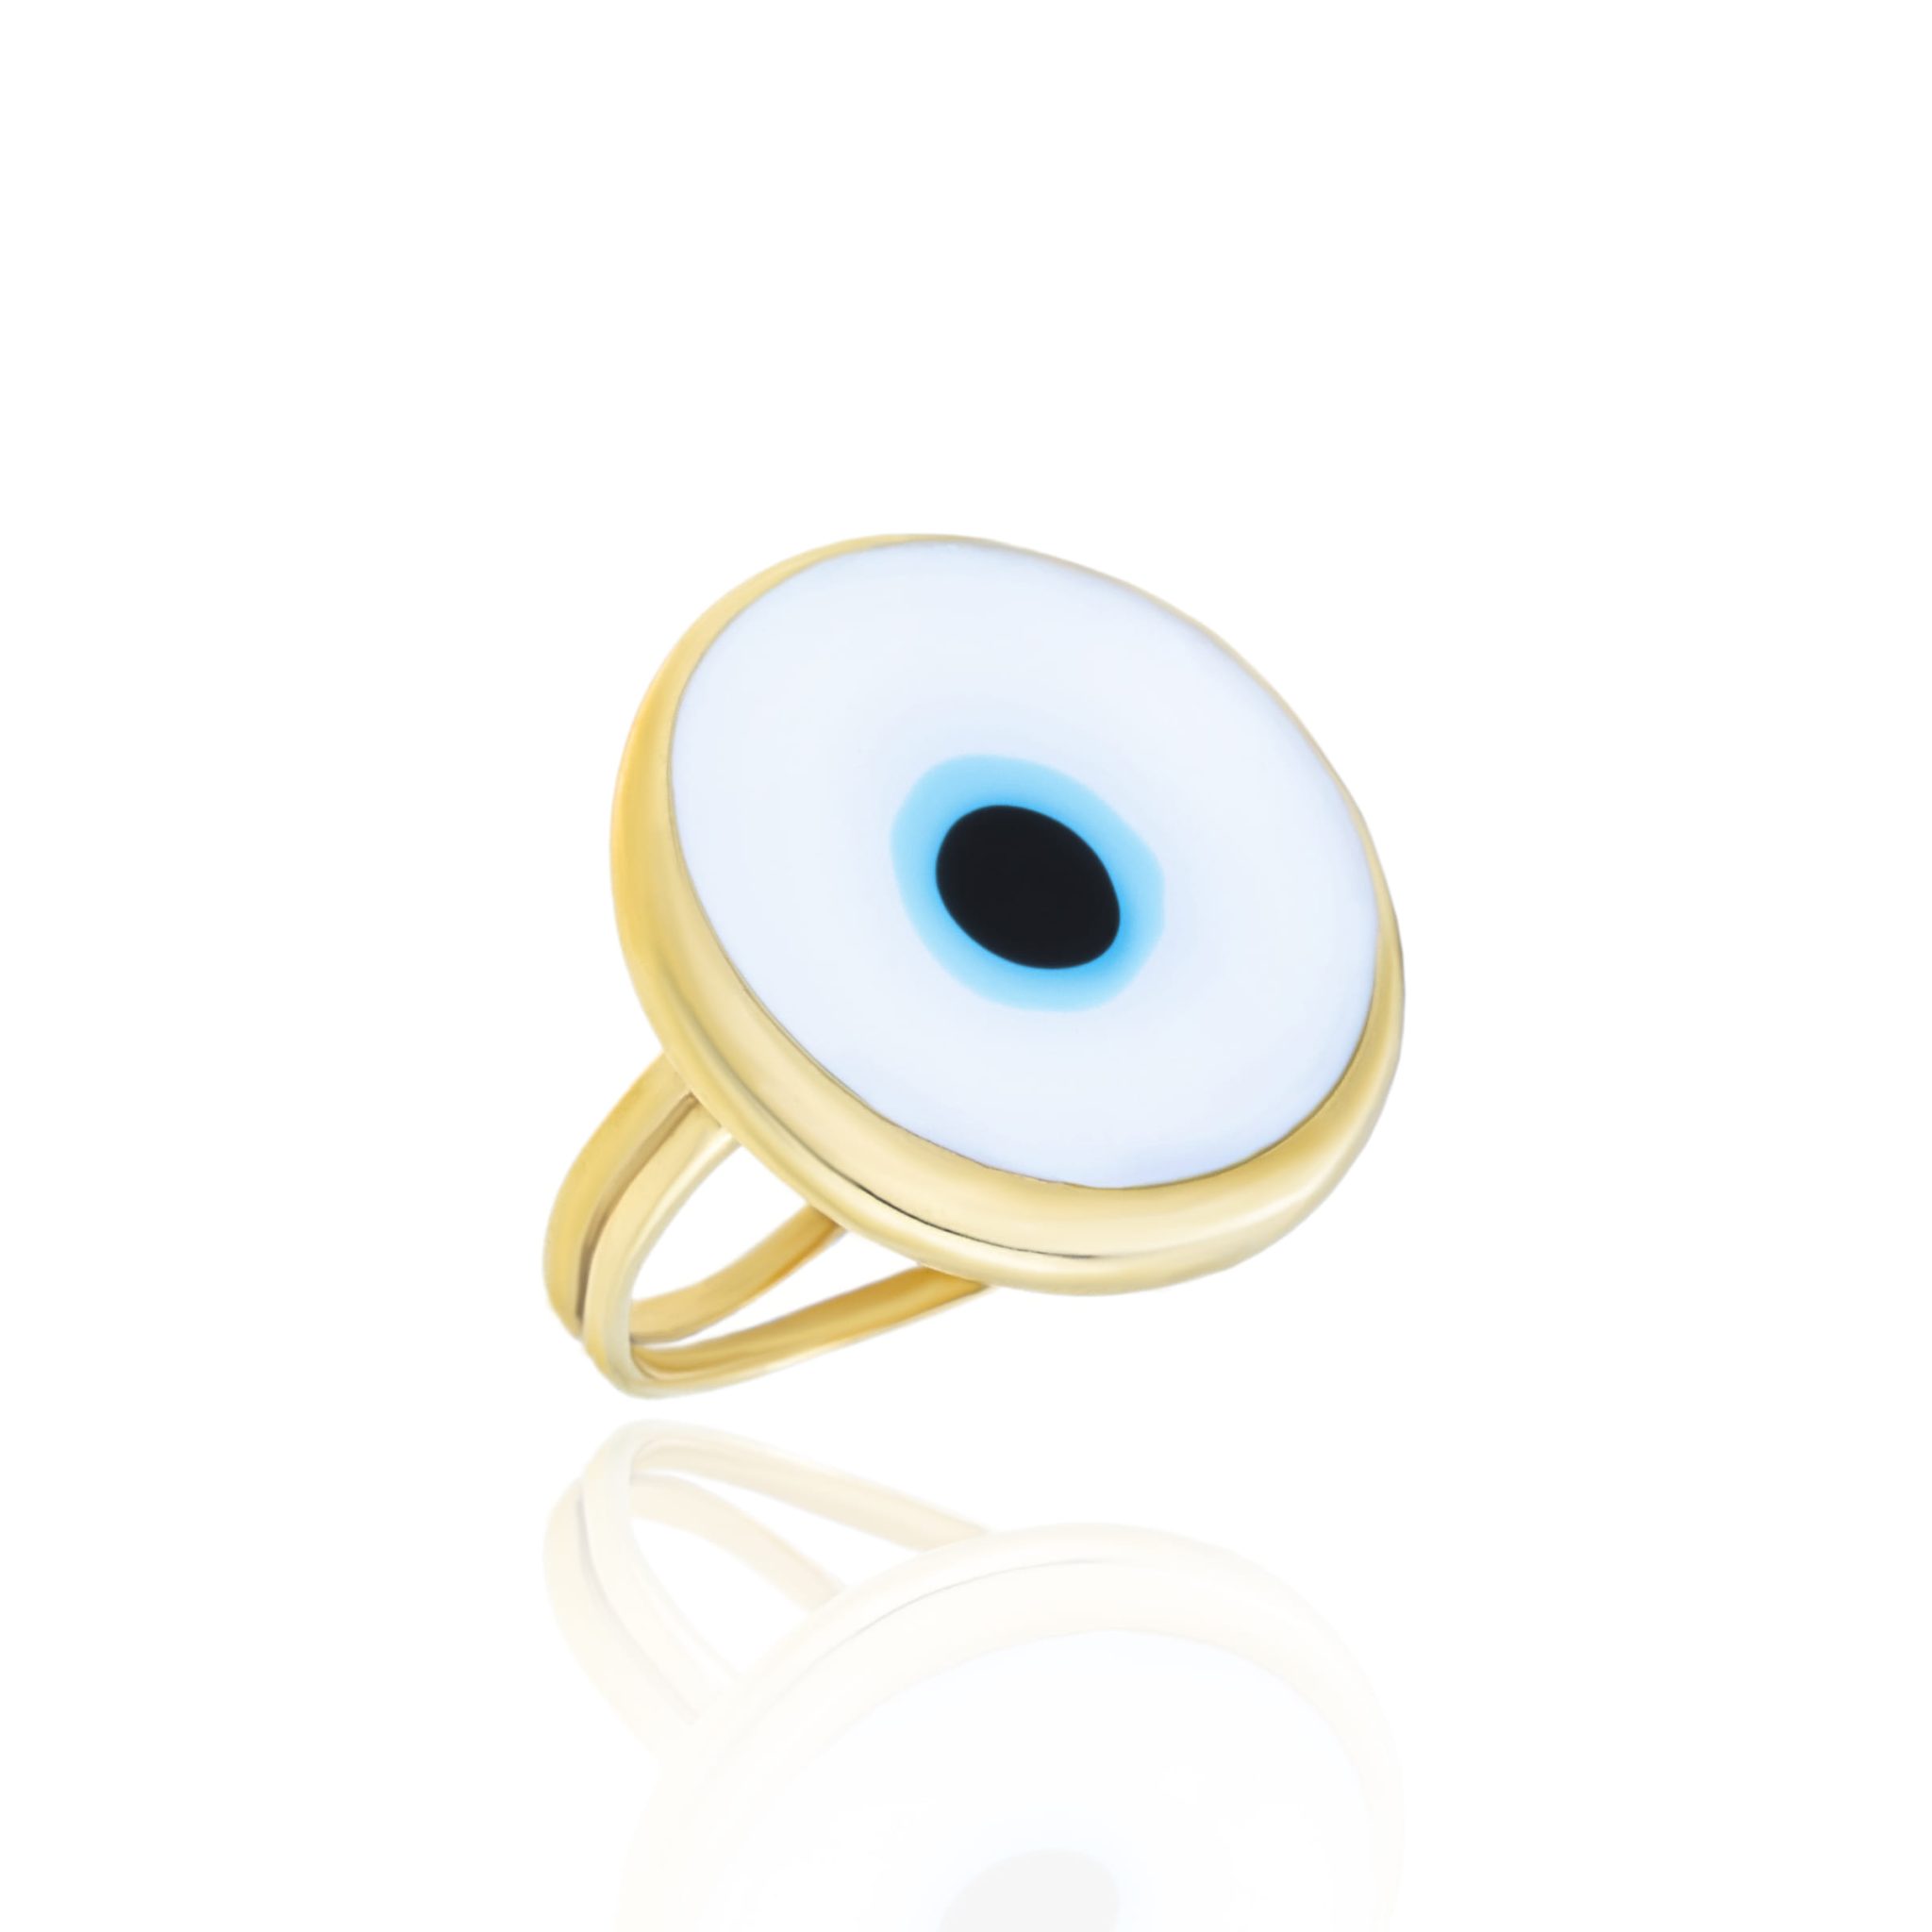 Ring-silver-925-yellow-gold-plated-&-with-enamel-evil-eye